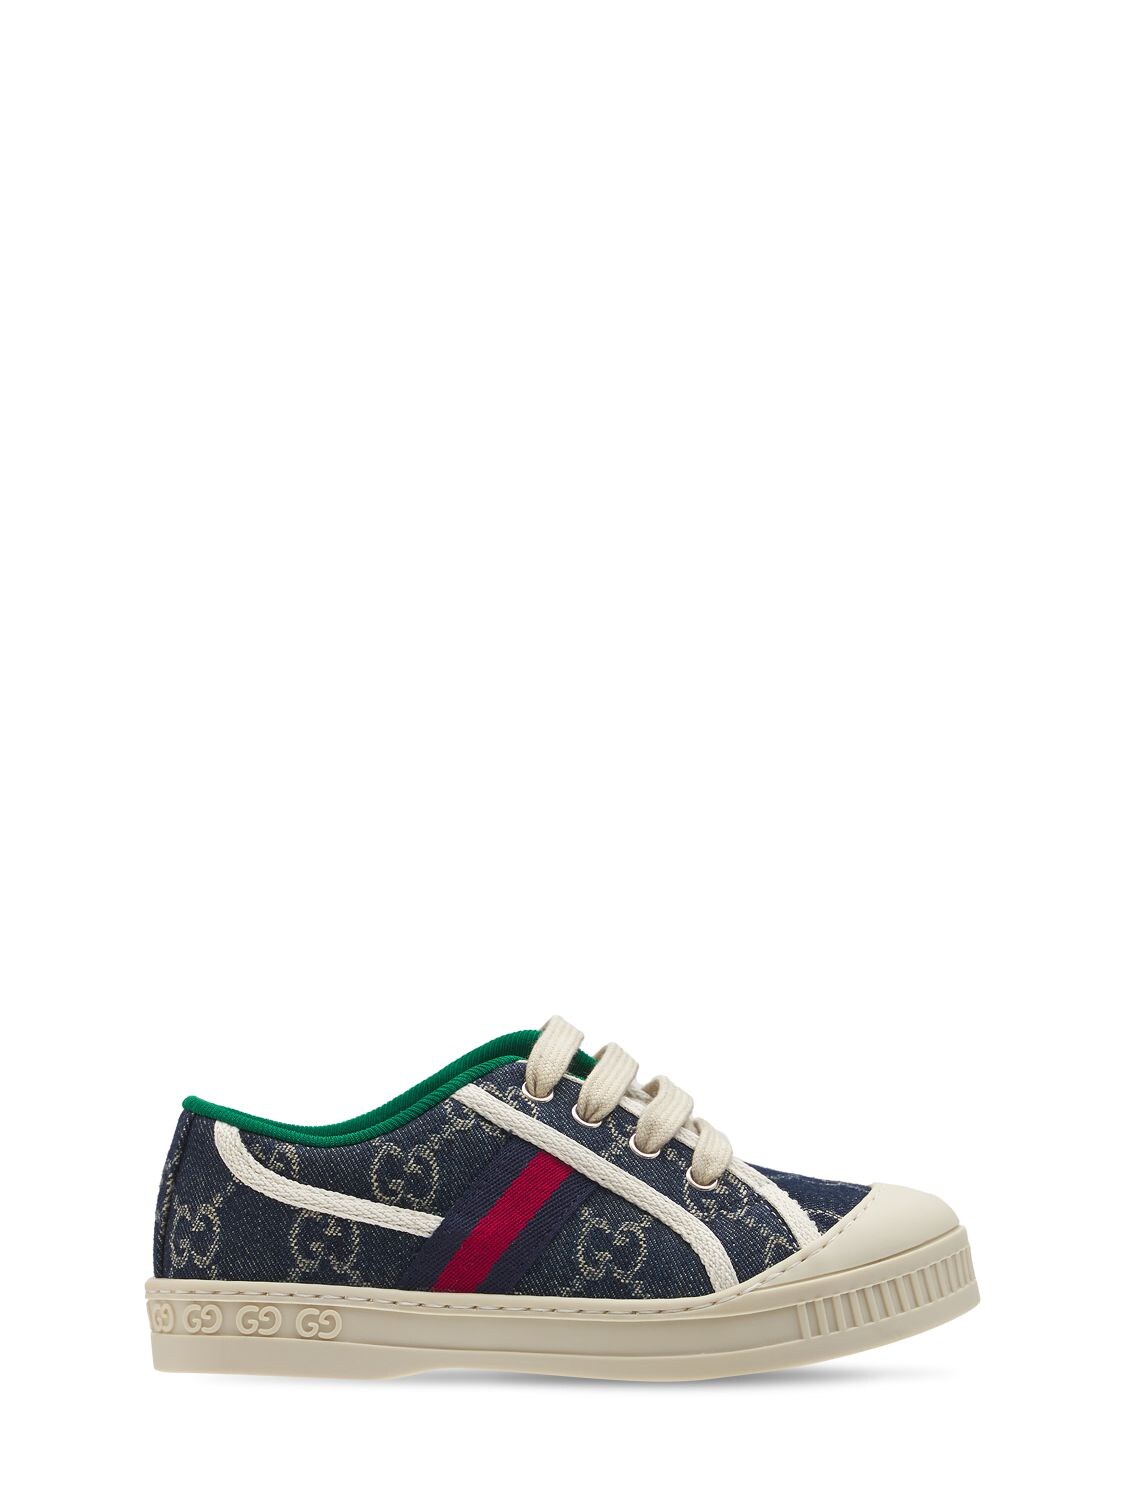 Gucci Gg Tennis 1977 Cotton Lace-up Sneakers In 4660 Dk Blu Ivo/m.wh